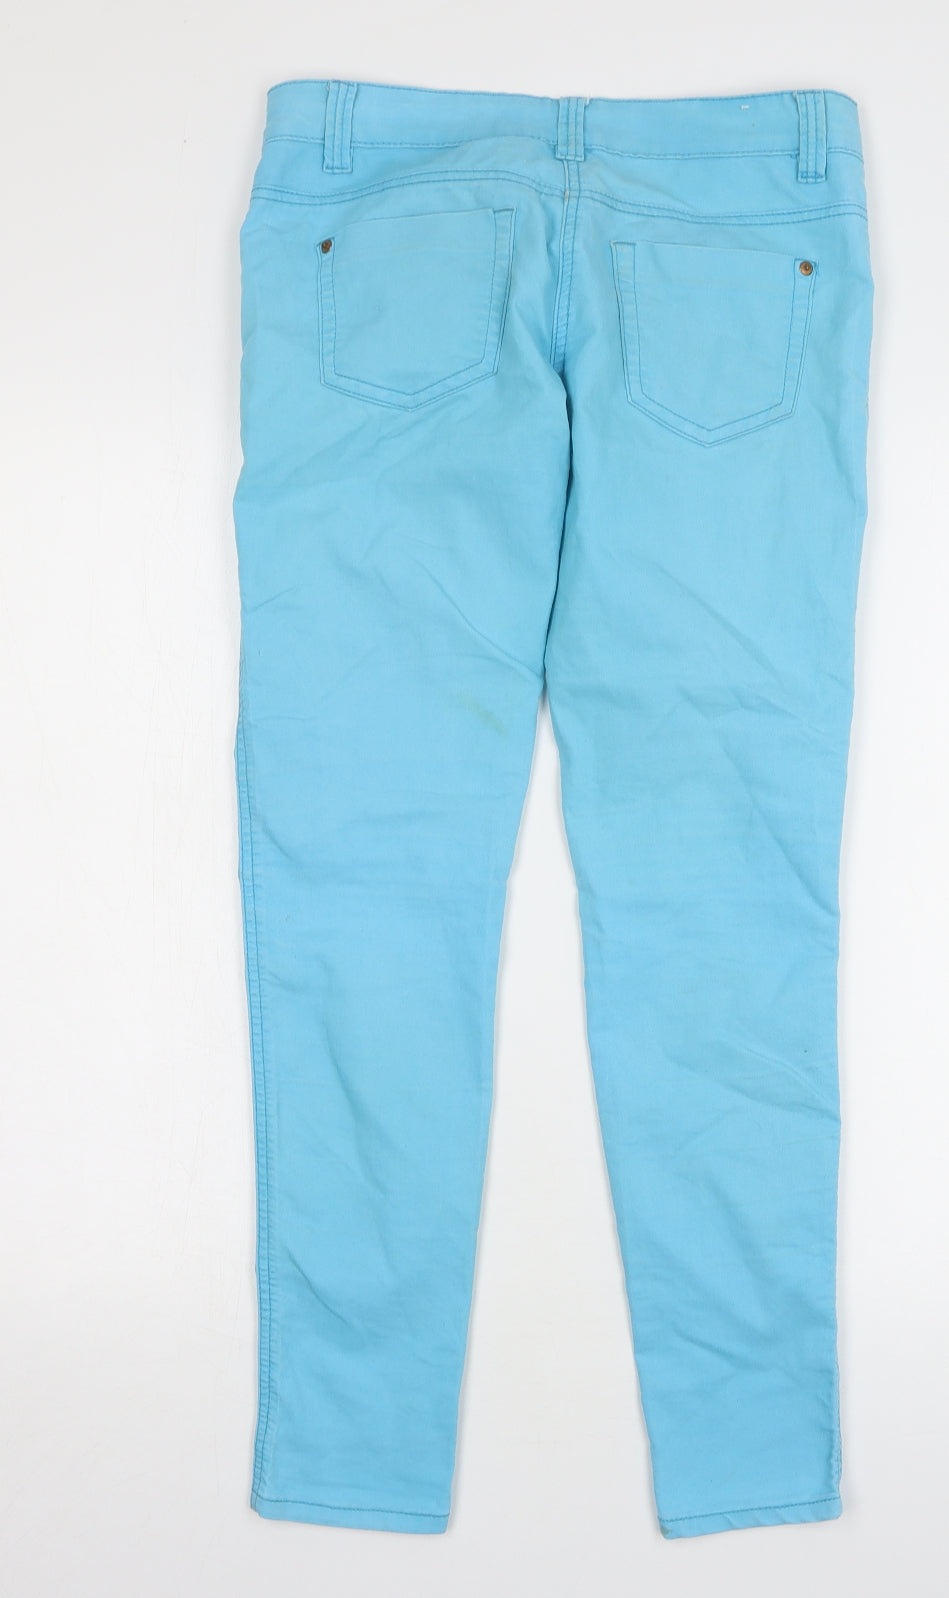 New Look Girls Blue Cotton Skinny Jeans Size 13 Years L29 in Regular